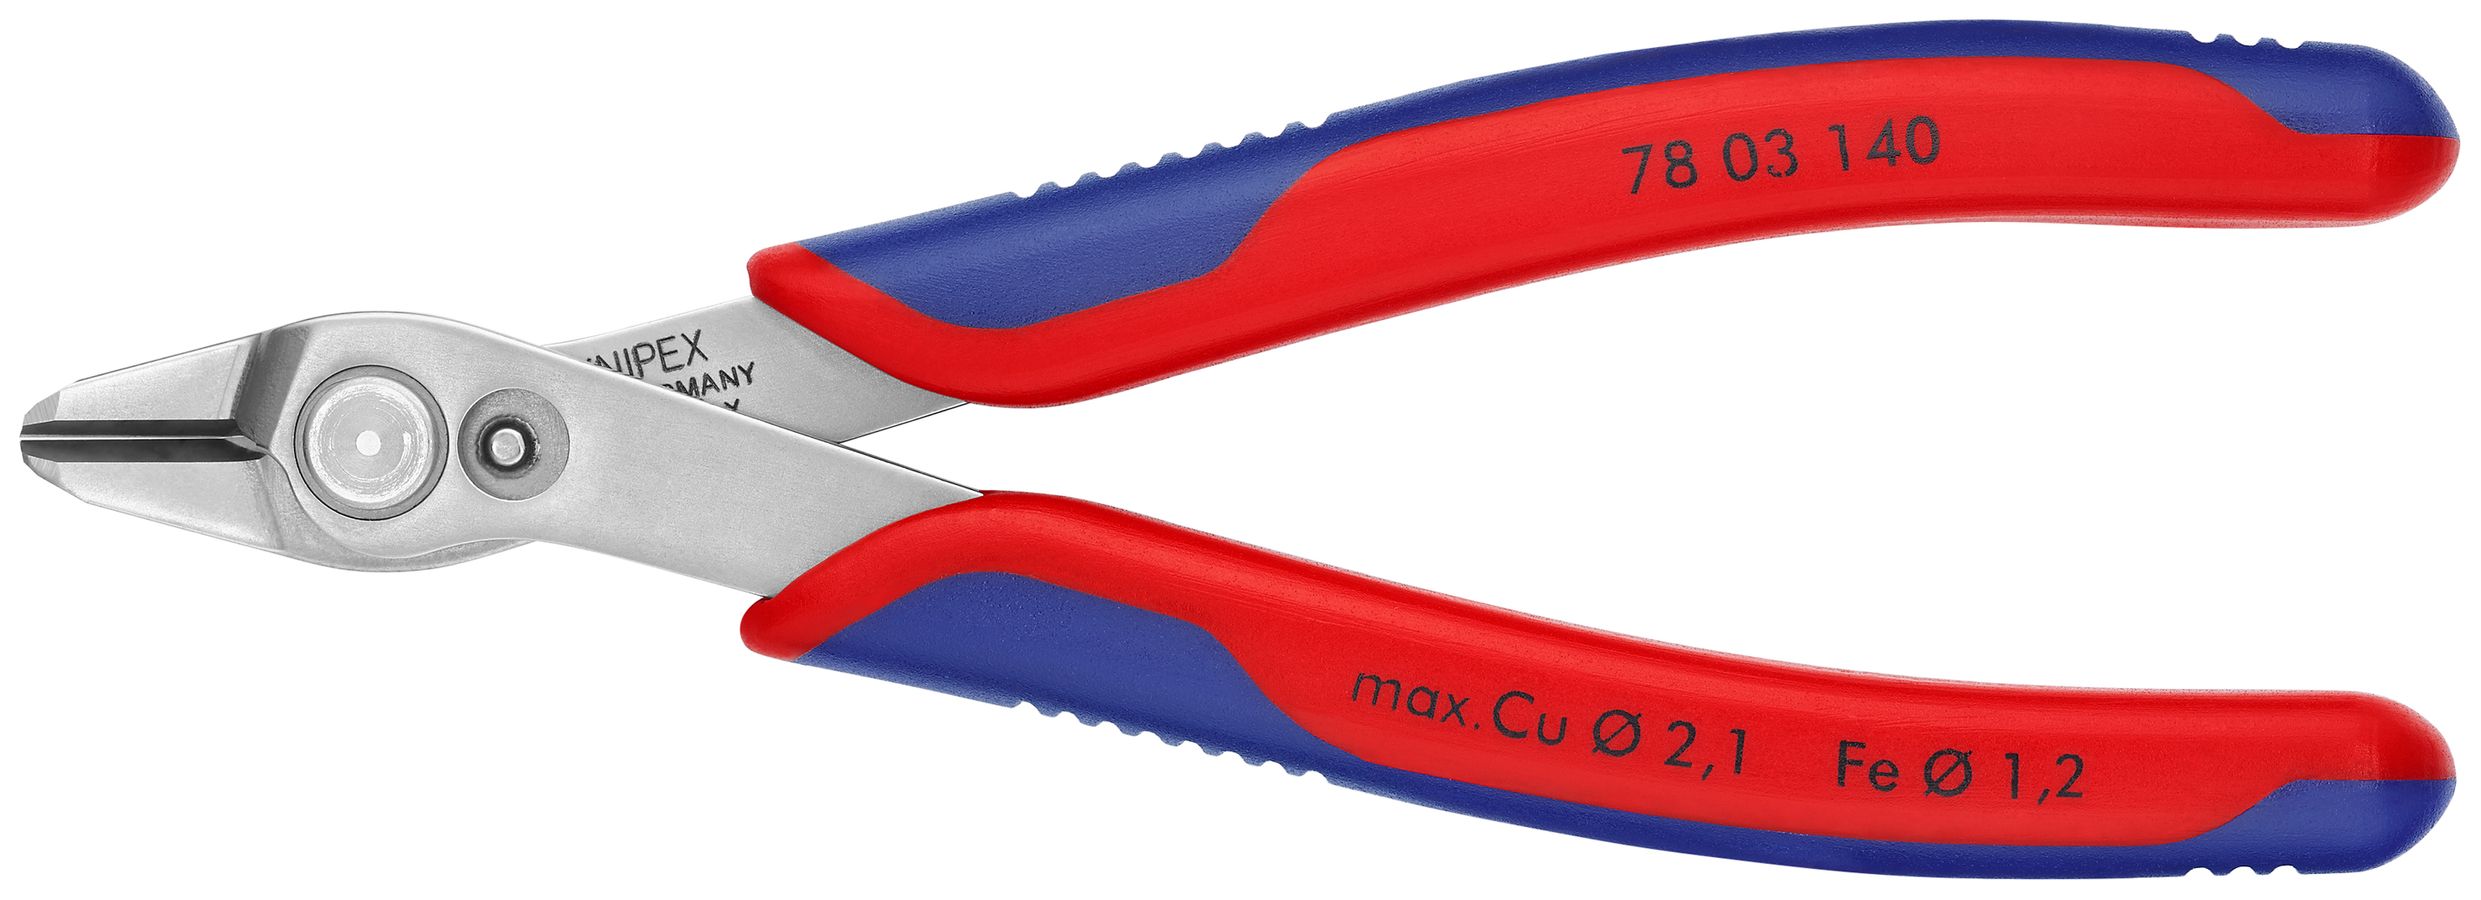 KNIPEX 精密SМDピンセット5本組セット(1S) 品番：9200-03